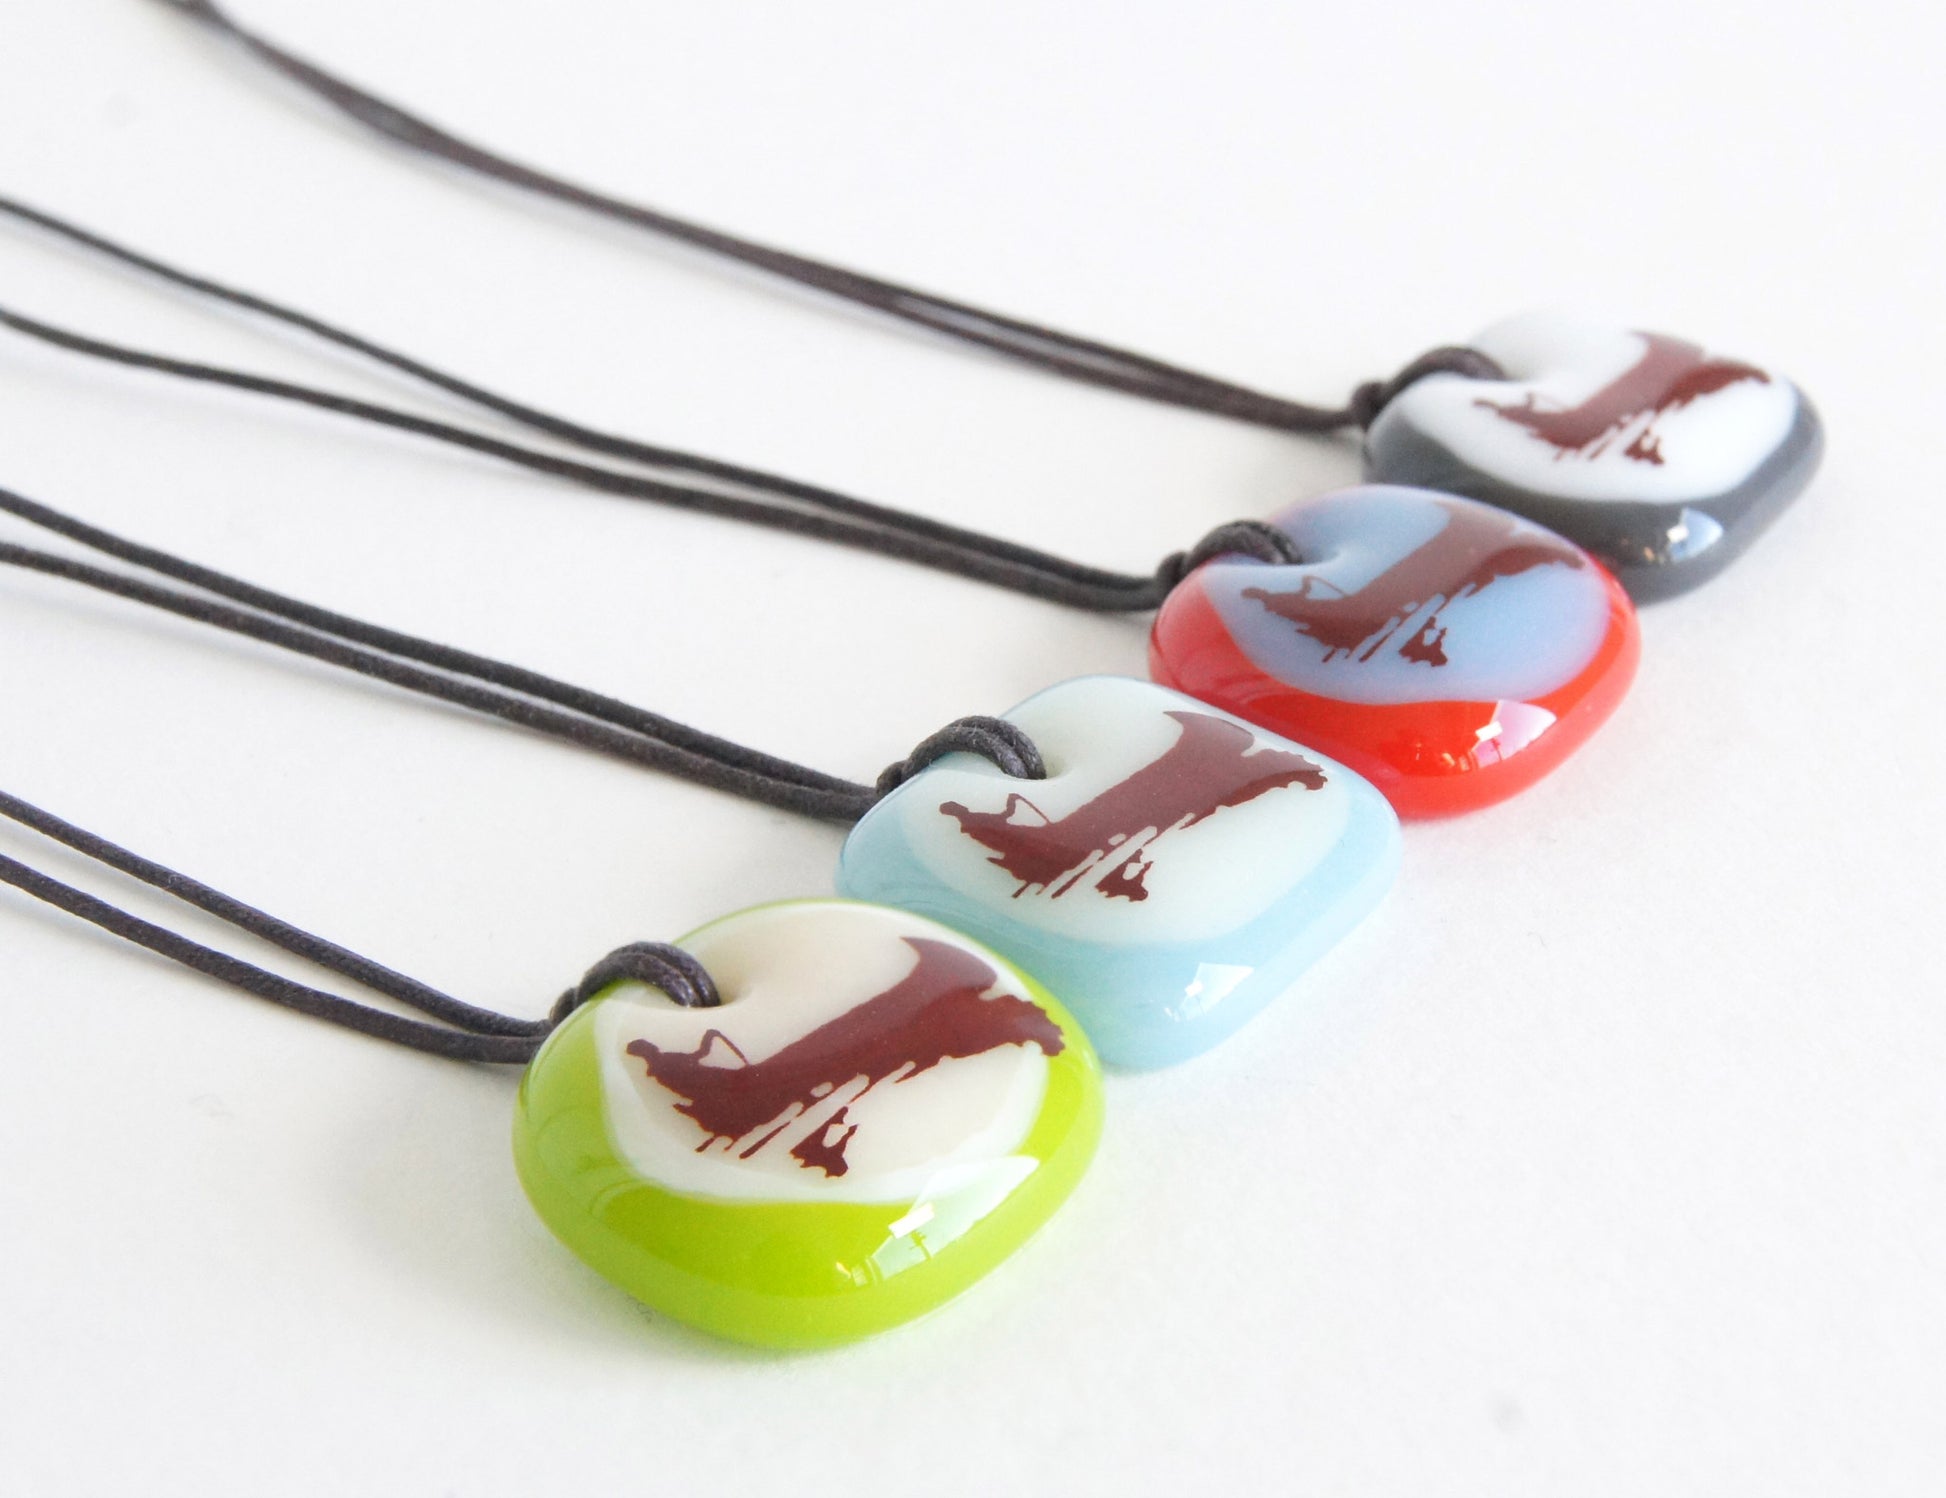 Handmade glass necklaces with canoe on a lake illustration.